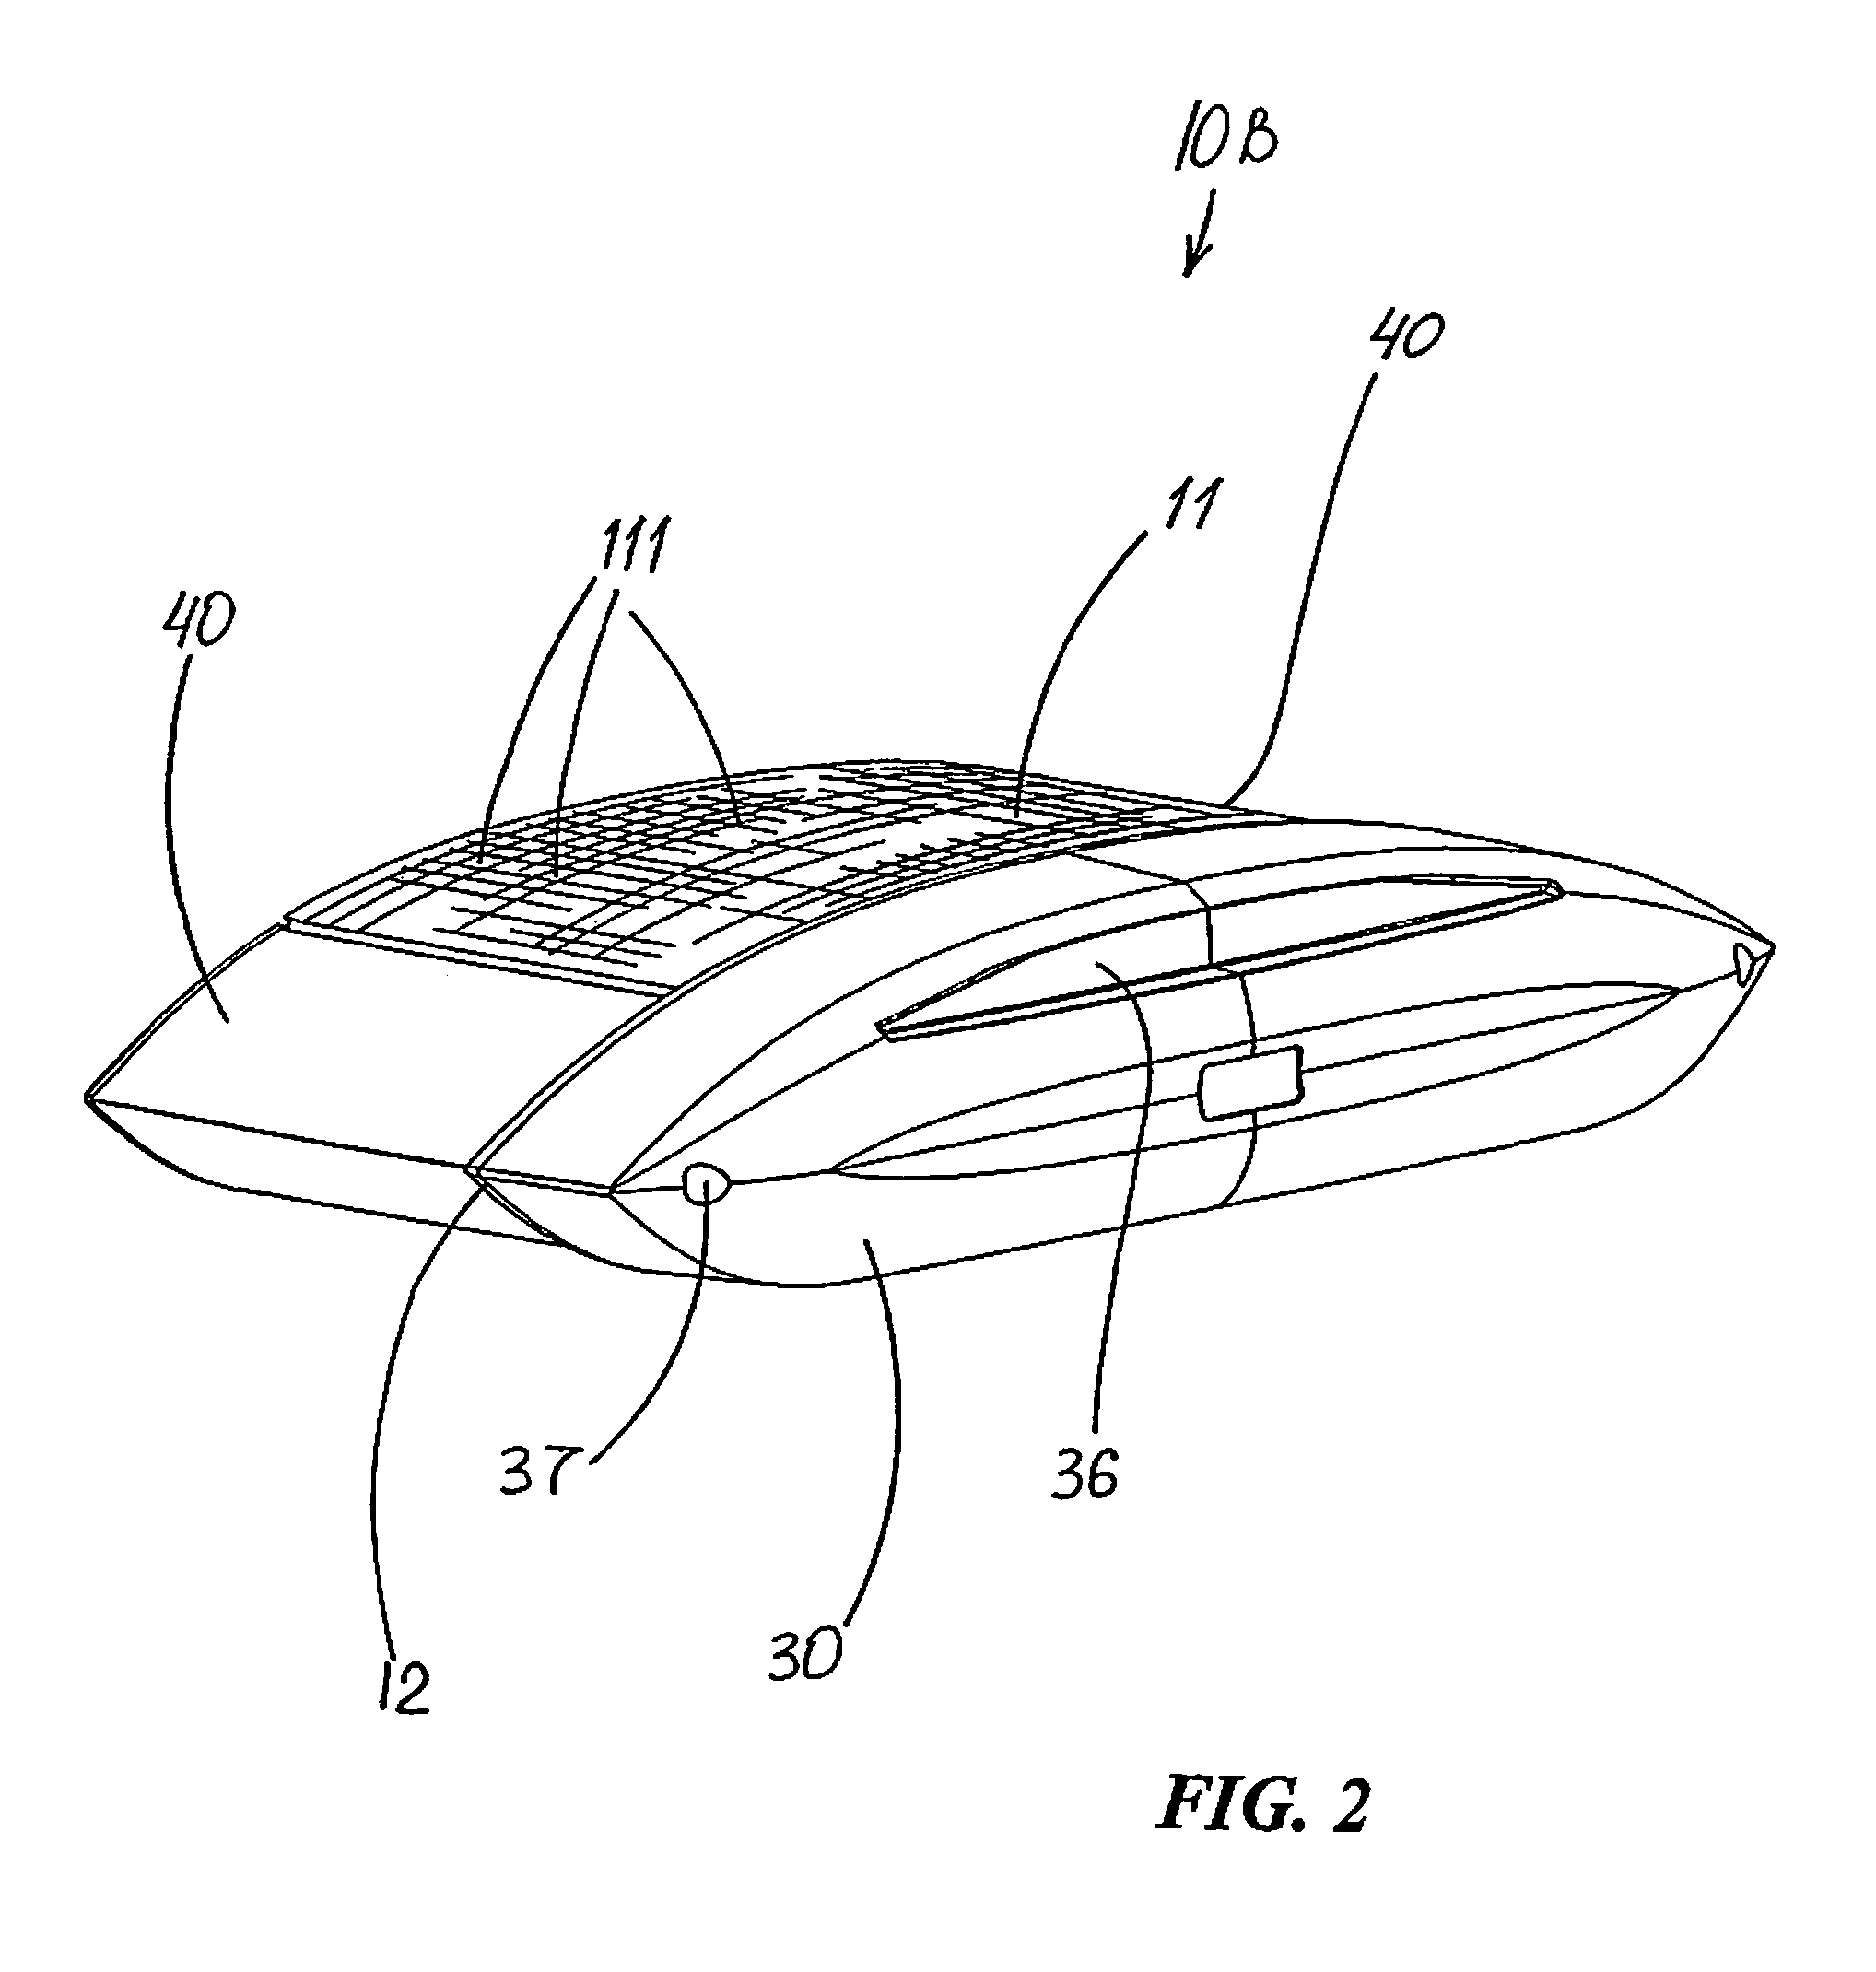 Power supply mounting apparatus for lighting fixture